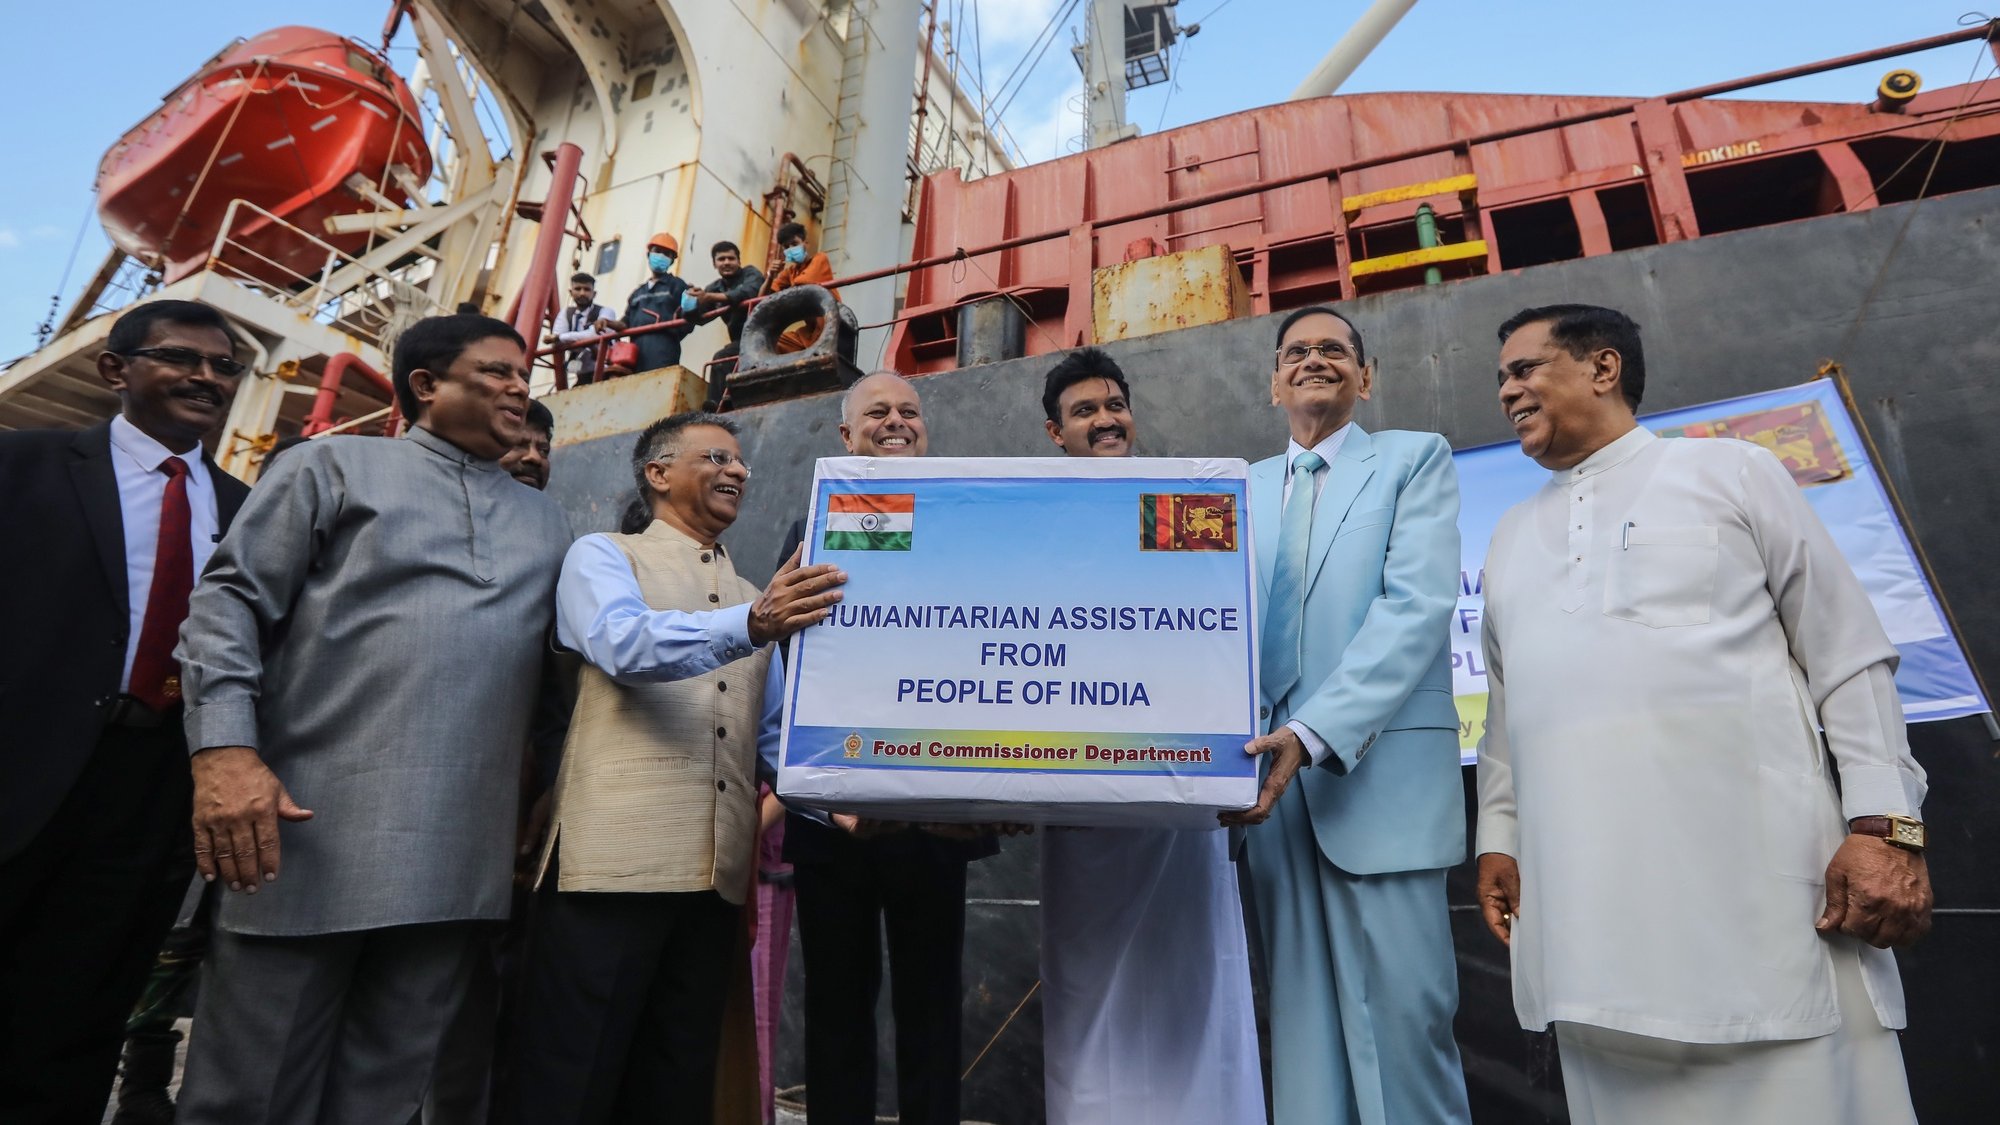 epa09966147 Indian High Commissioner to Sri Lanka Gopal Baglay (3-L) officially hands over a consignment of humanitarian aid granted by the Government of India to Sri Lankan Foreign Minister Gamini Lakshman Peiris (2-R) at the Port in Colombo, Sri Lanka, 22 May 2022. The Indian Government granted a consignment of milk powder, rice, and emergency medicines to Sri Lanka as emergency supplies to assist in the current economic crisis on May 22. Sri Lanka faces its worst economic crisis in decades due to the lack of foreign exchange, resulting in severe shortages in food, fuel, medicine, and imported goods.  EPA/CHAMILA KARUNARATHNE